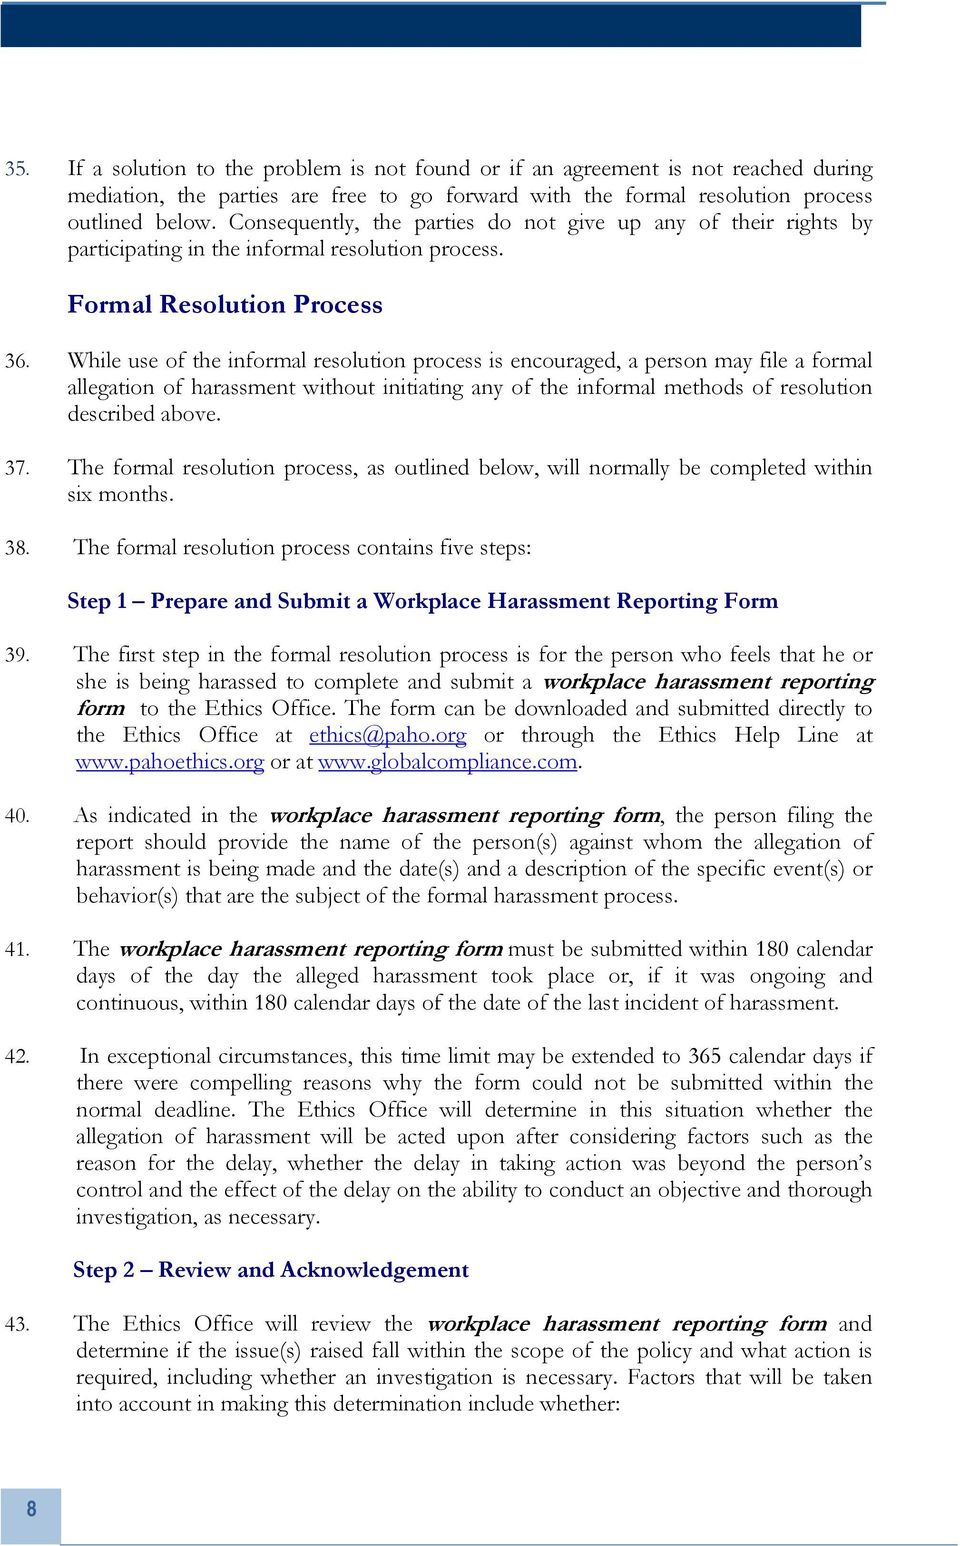 While use of the informal resolution process is encouraged, a person may file a formal allegation of harassment without initiating any of the informal methods of resolution described above. 37.